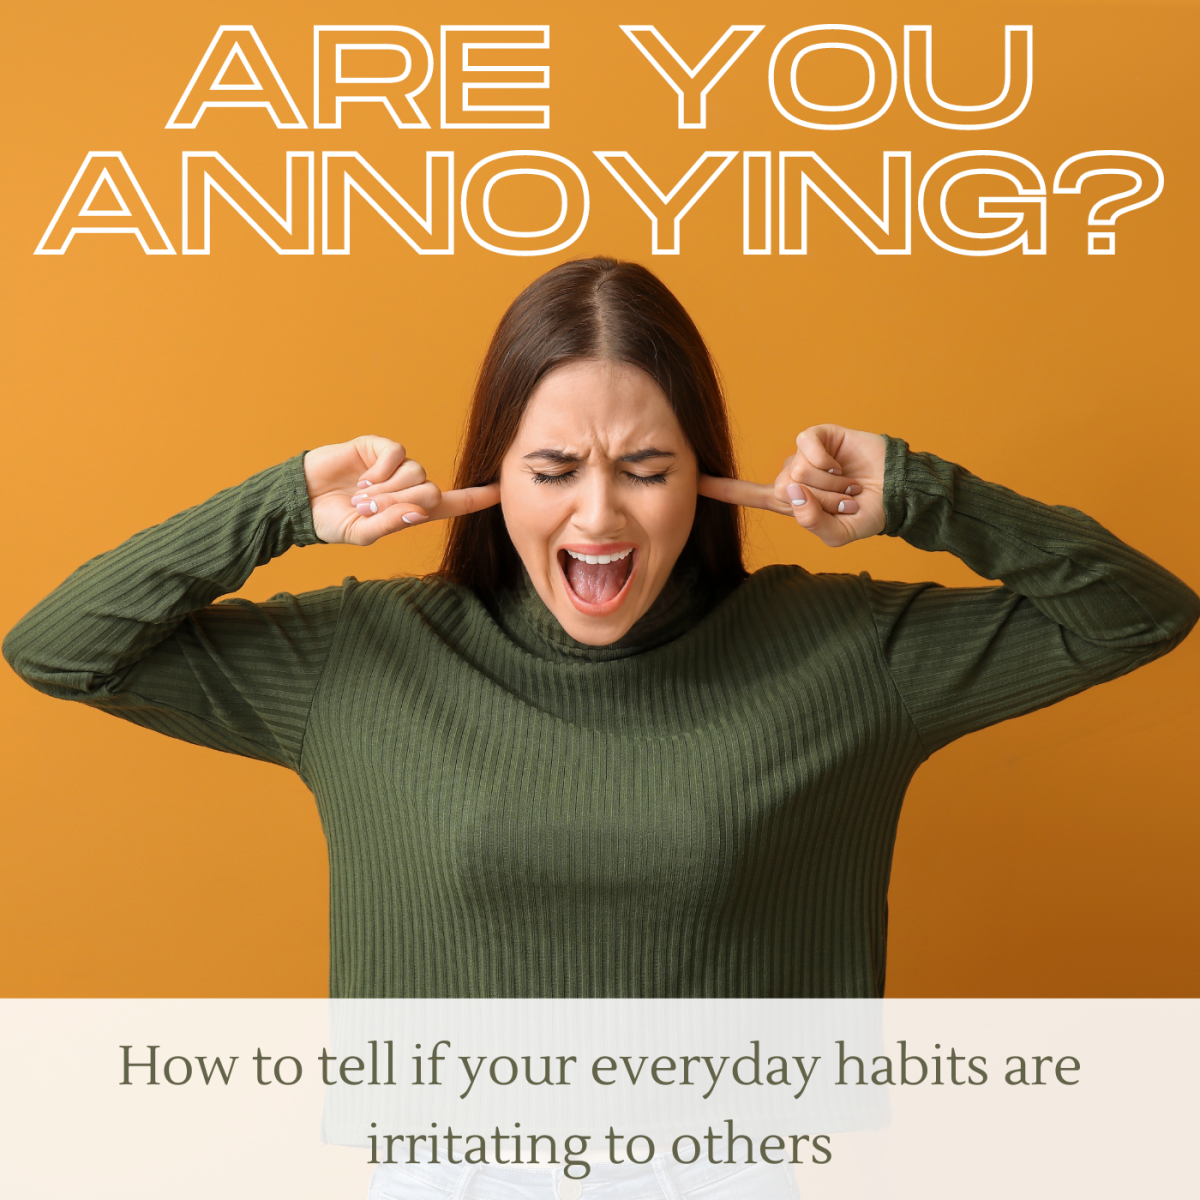 Trying To Stop Being Annoying: What You Can Do